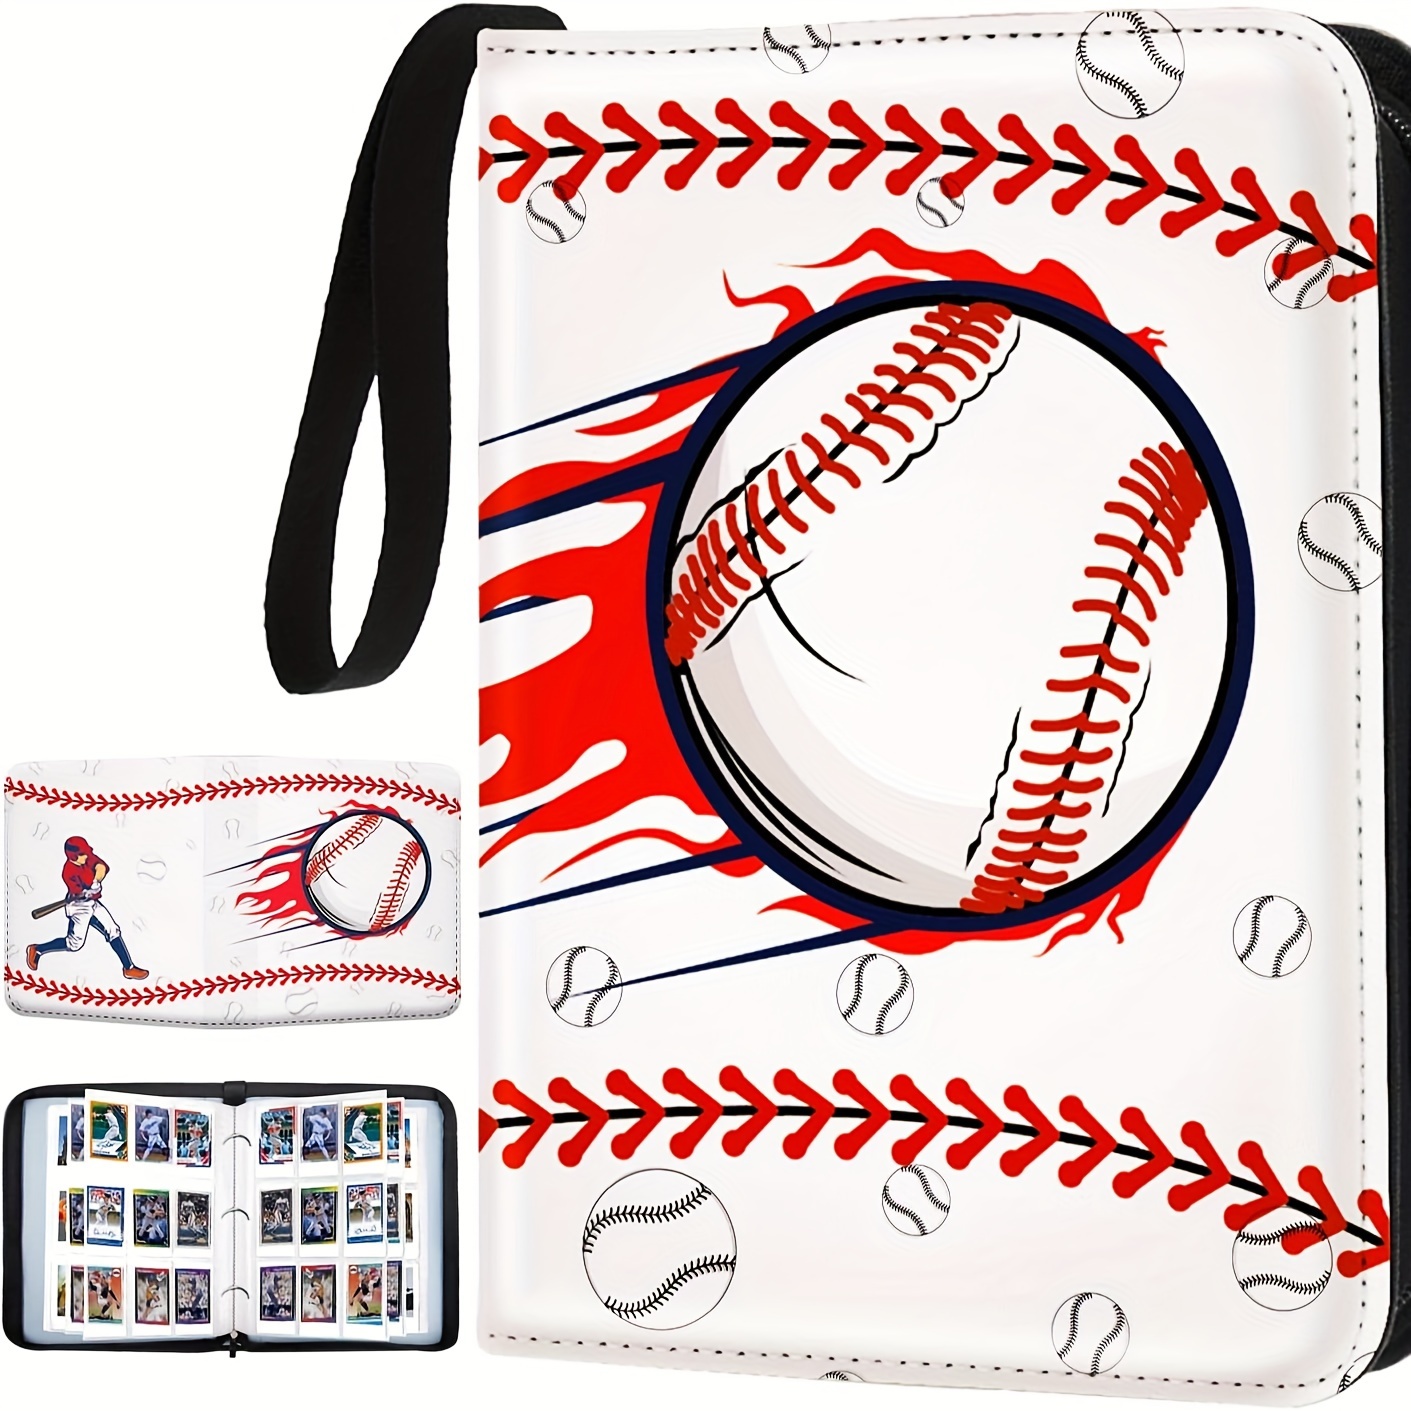 

Baseball Card Binder With 900 Pockets Trading Card Binder With Sleeves Sports Card Binder Collectible Trading Card Albums Fits 900 Cards With 50 Removable Sleeves